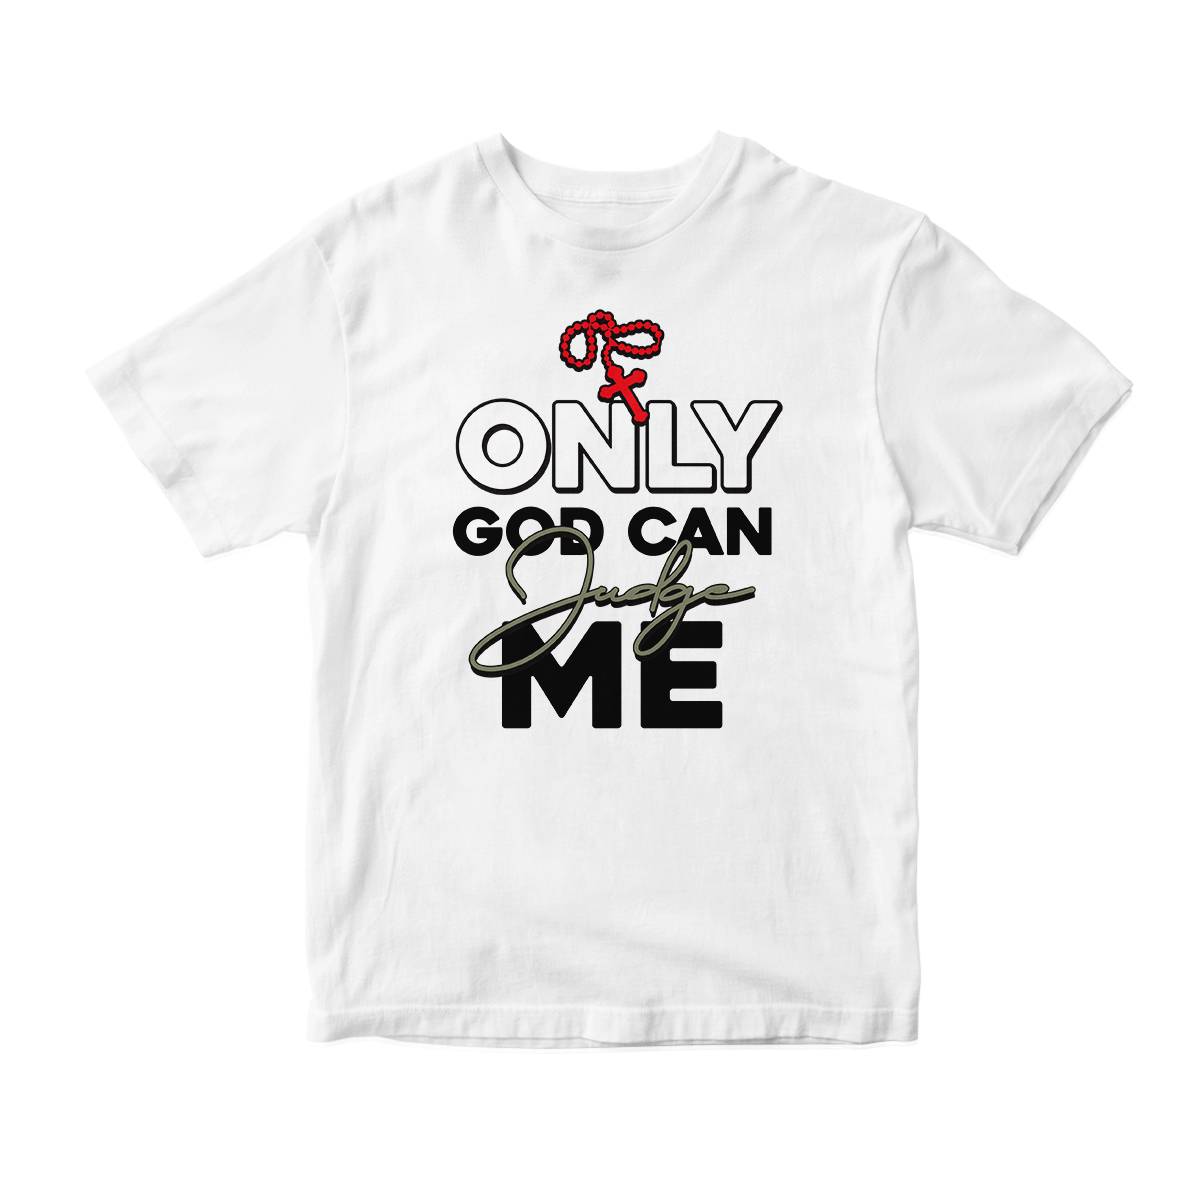 'Only God Can Judge Me' in Medium Olive CW Short Sleeve Tee